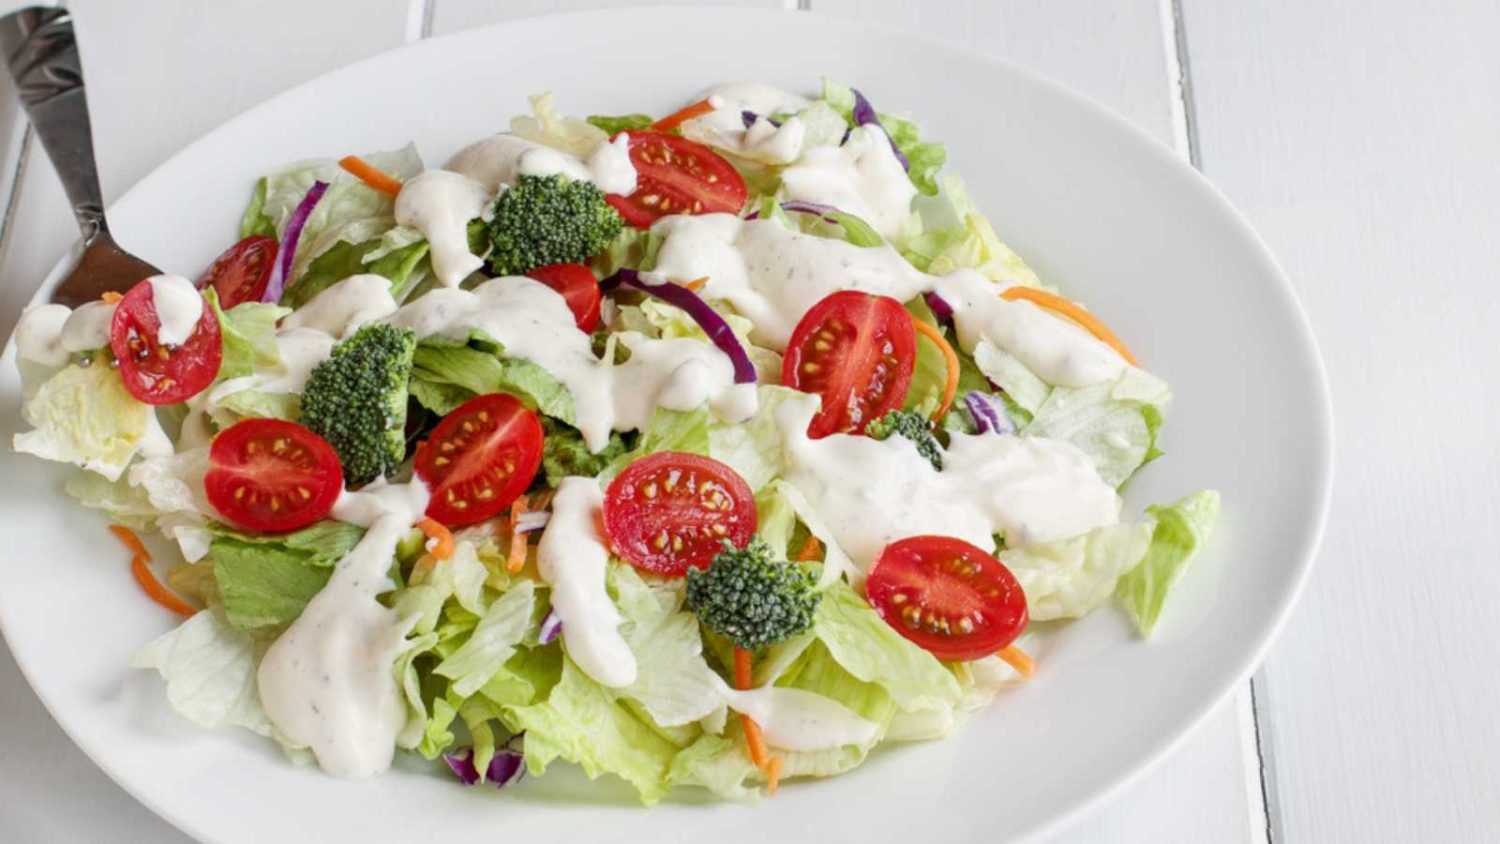 Plate of homemade fresh salad with buttermilk ranch dressing, tomatoes, broccoli, cabbage and carrots served over a white wooden table. House Salad.